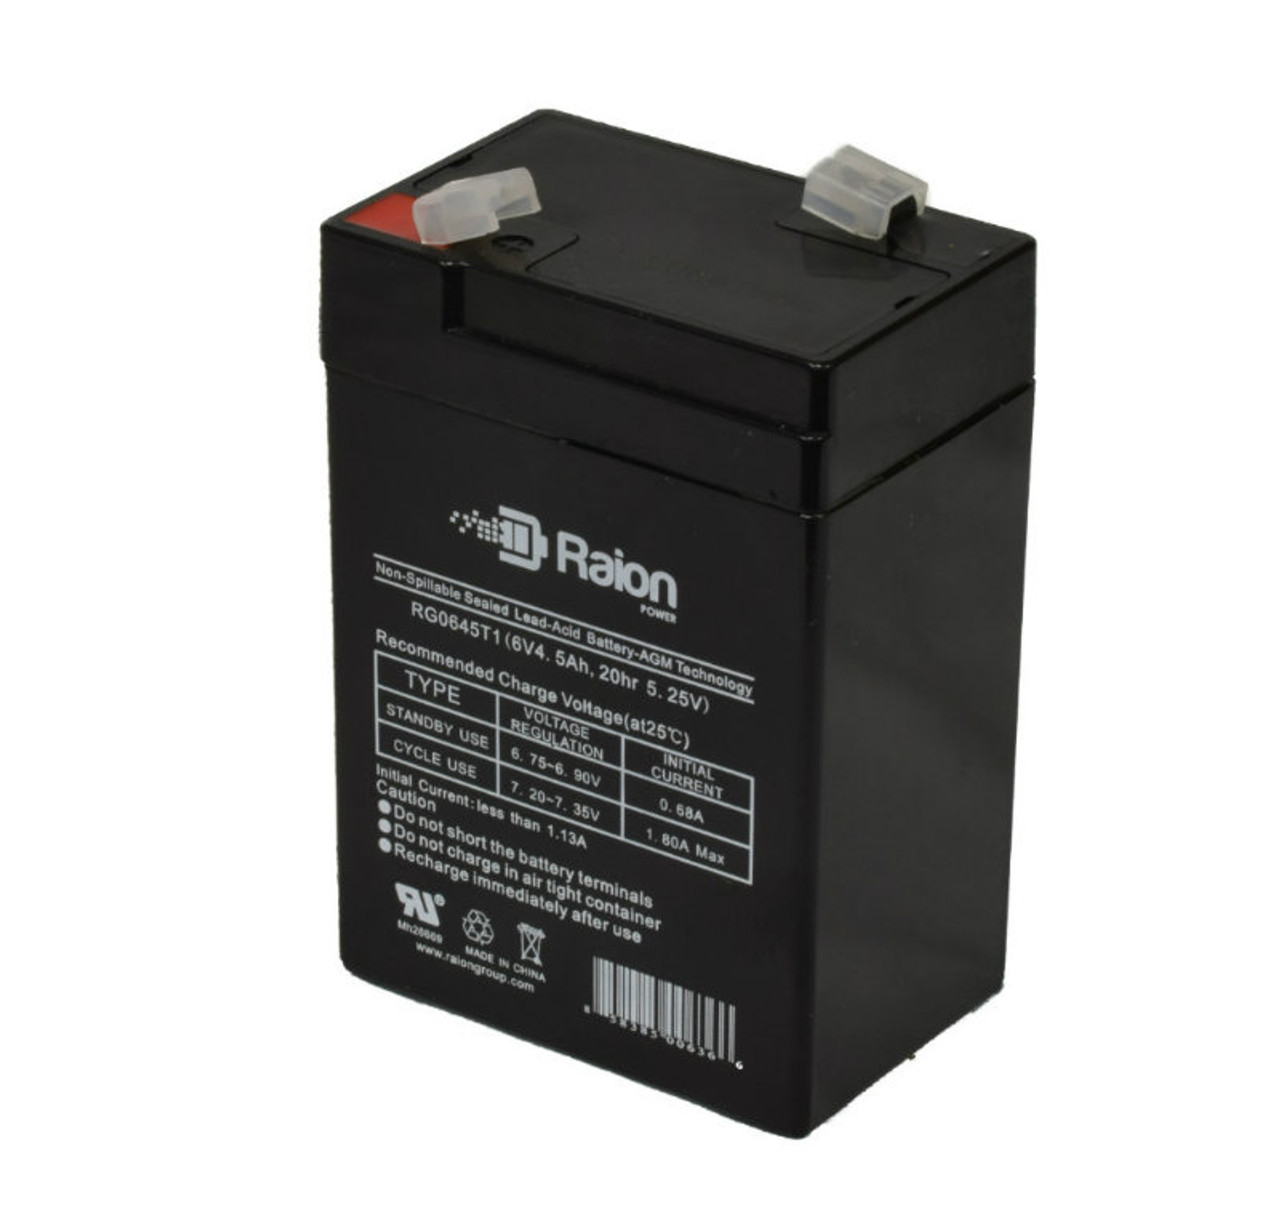 Raion Power RG0645T1 6V 4.5Ah Replacement Battery Cartridge for Double Tech DB6-4.5